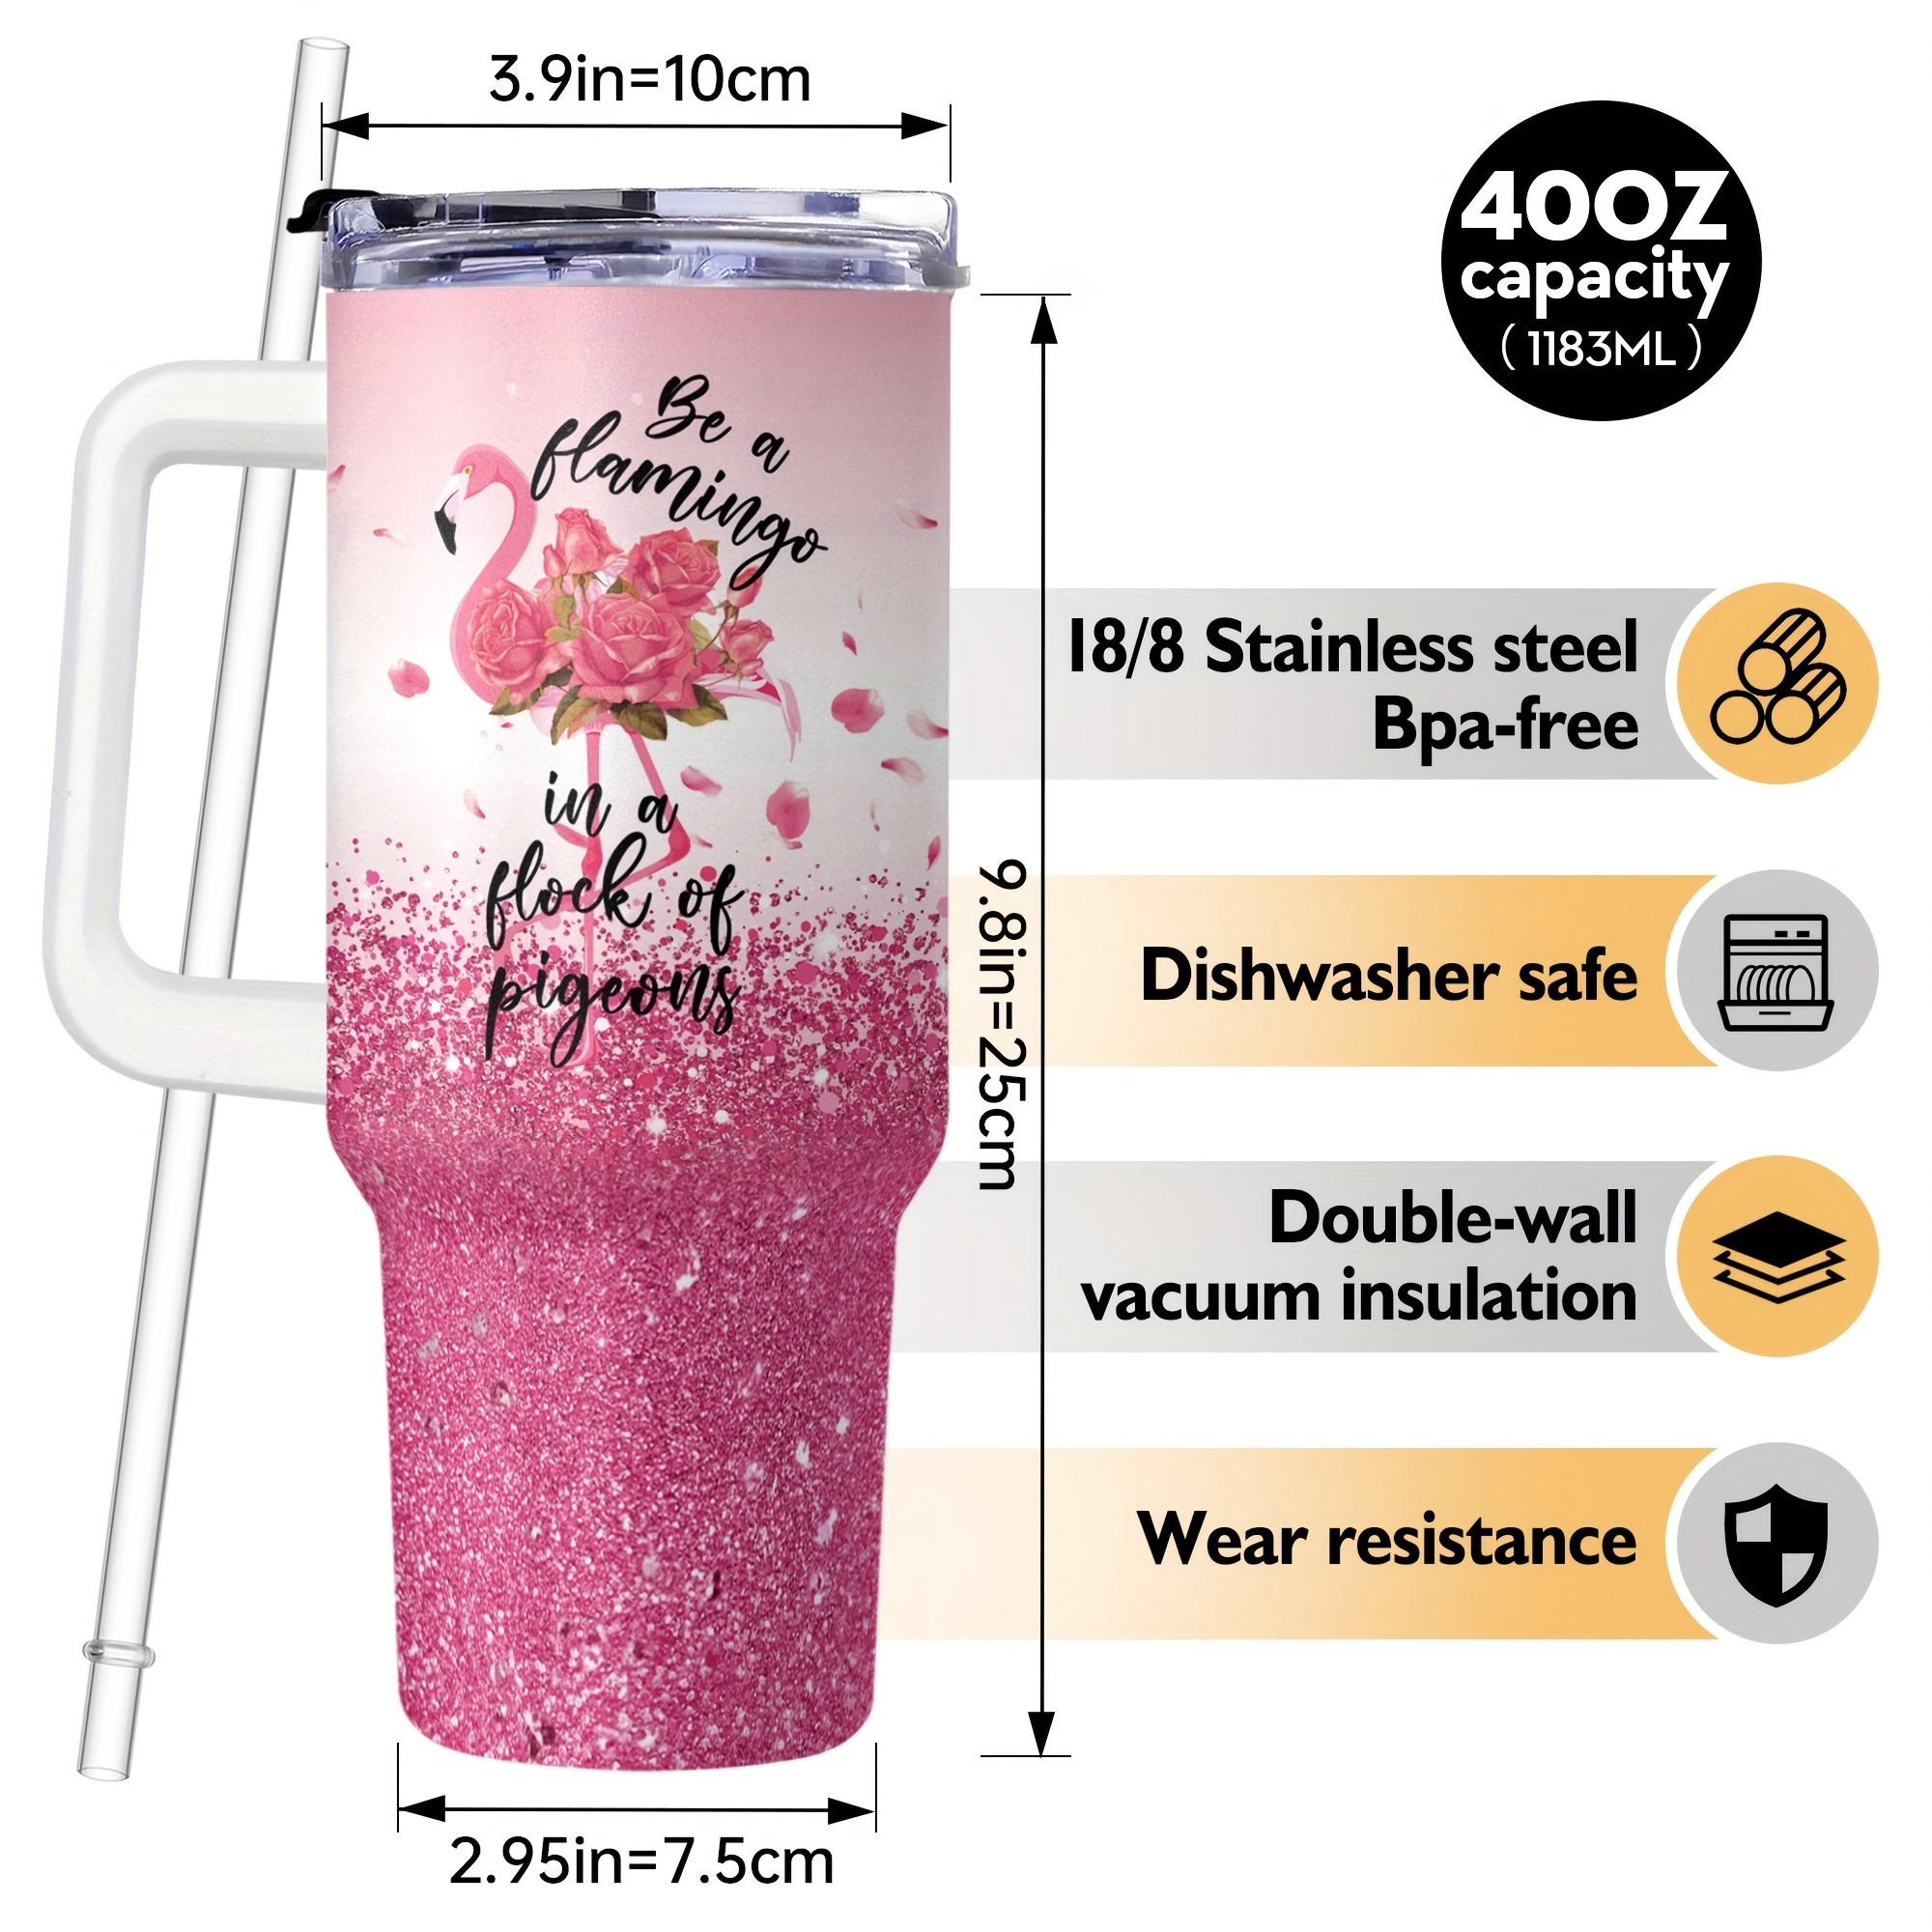 PINK Flamingo 40oz Quencher H2.0 Coffee Mugs Cups Camping Travel